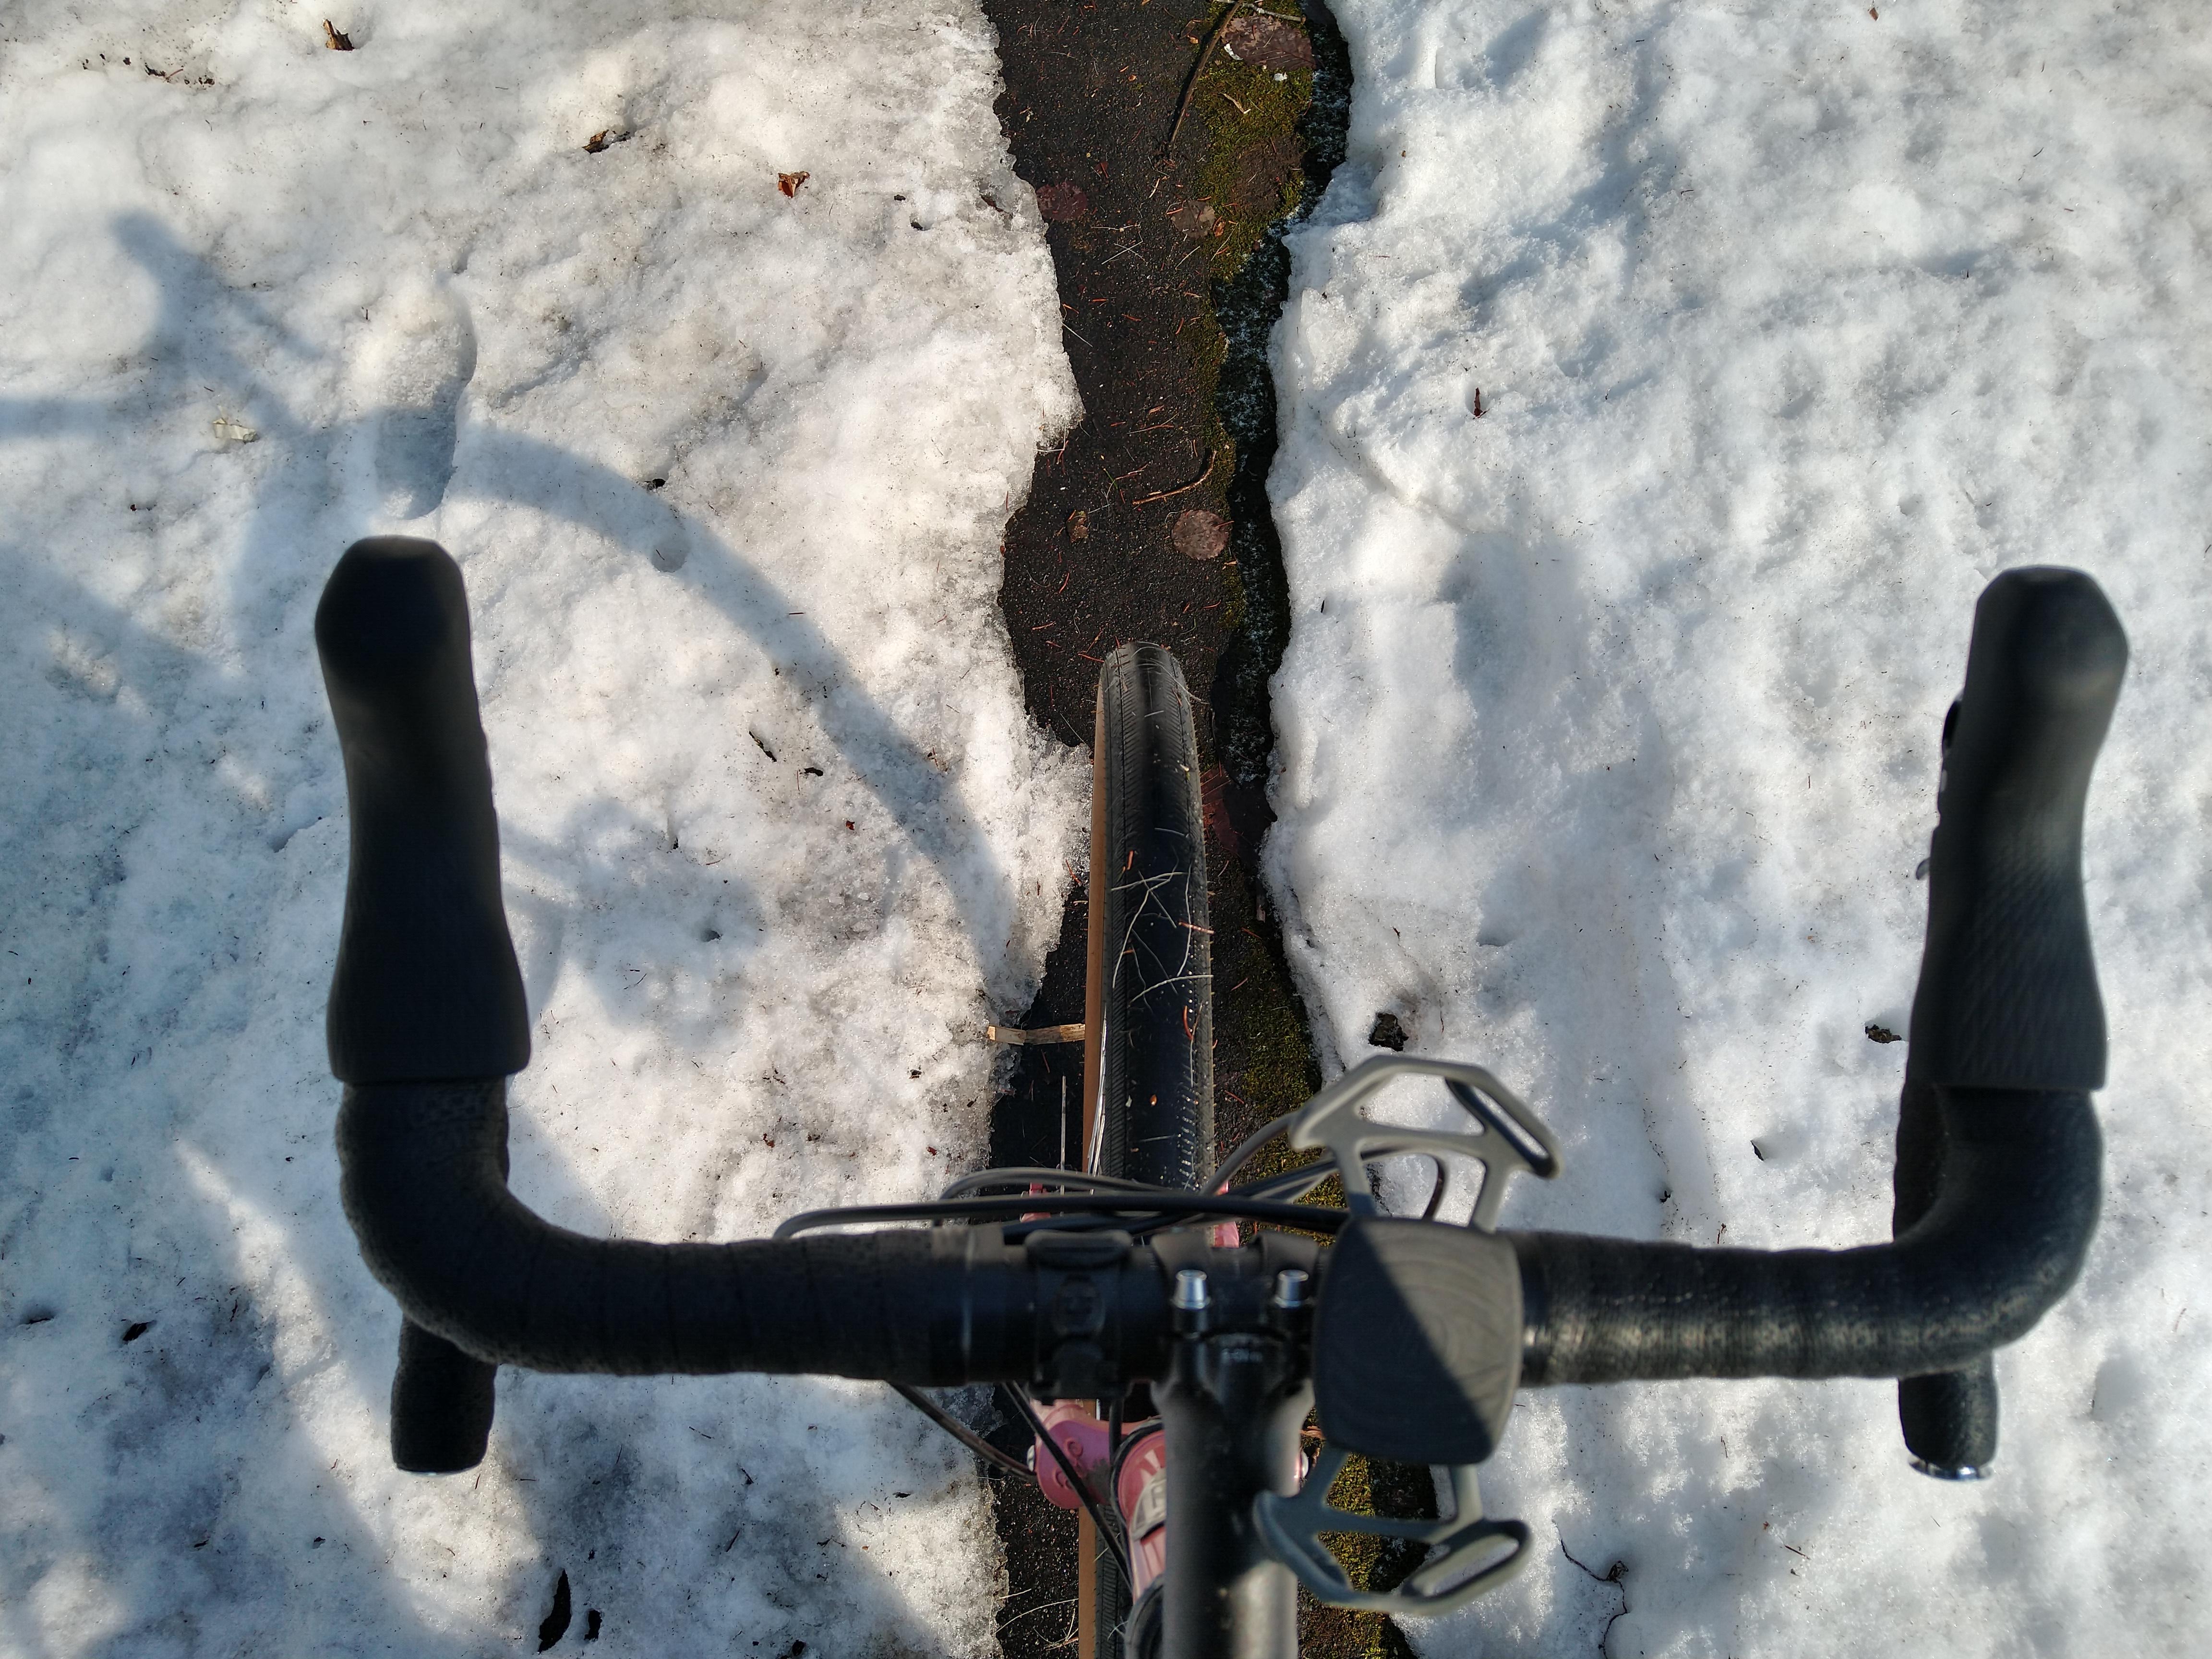 Looking down from a bike saddle while threading through a narrow strip of path with snow on either side.